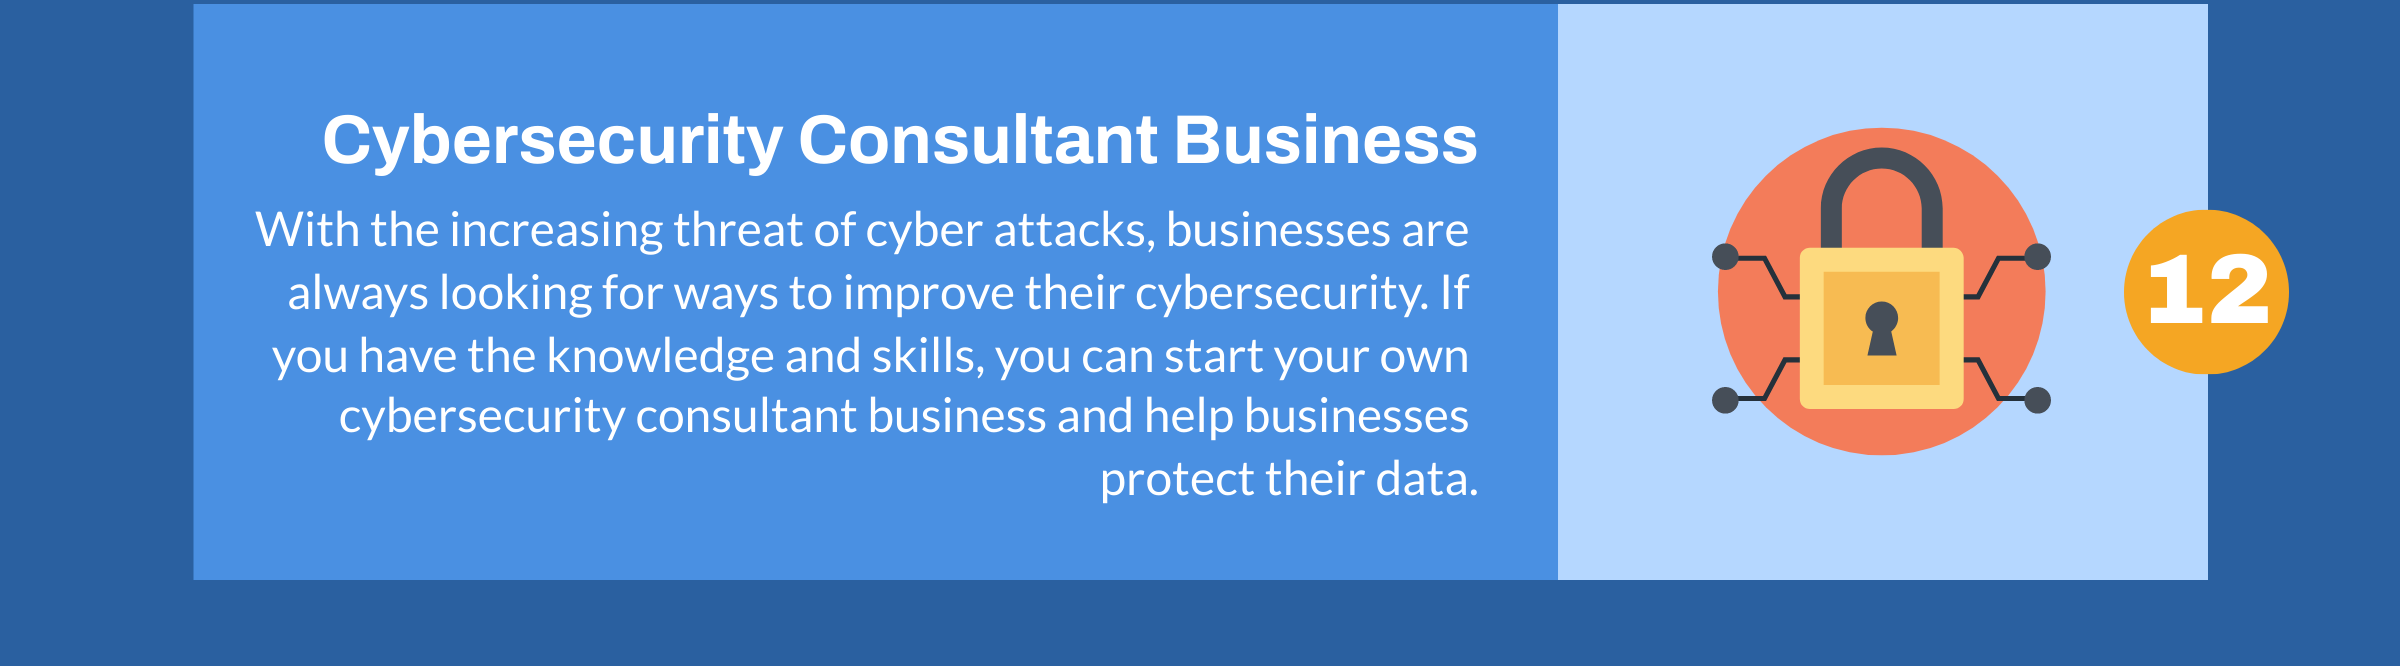 Cybersecurity Consultant Business